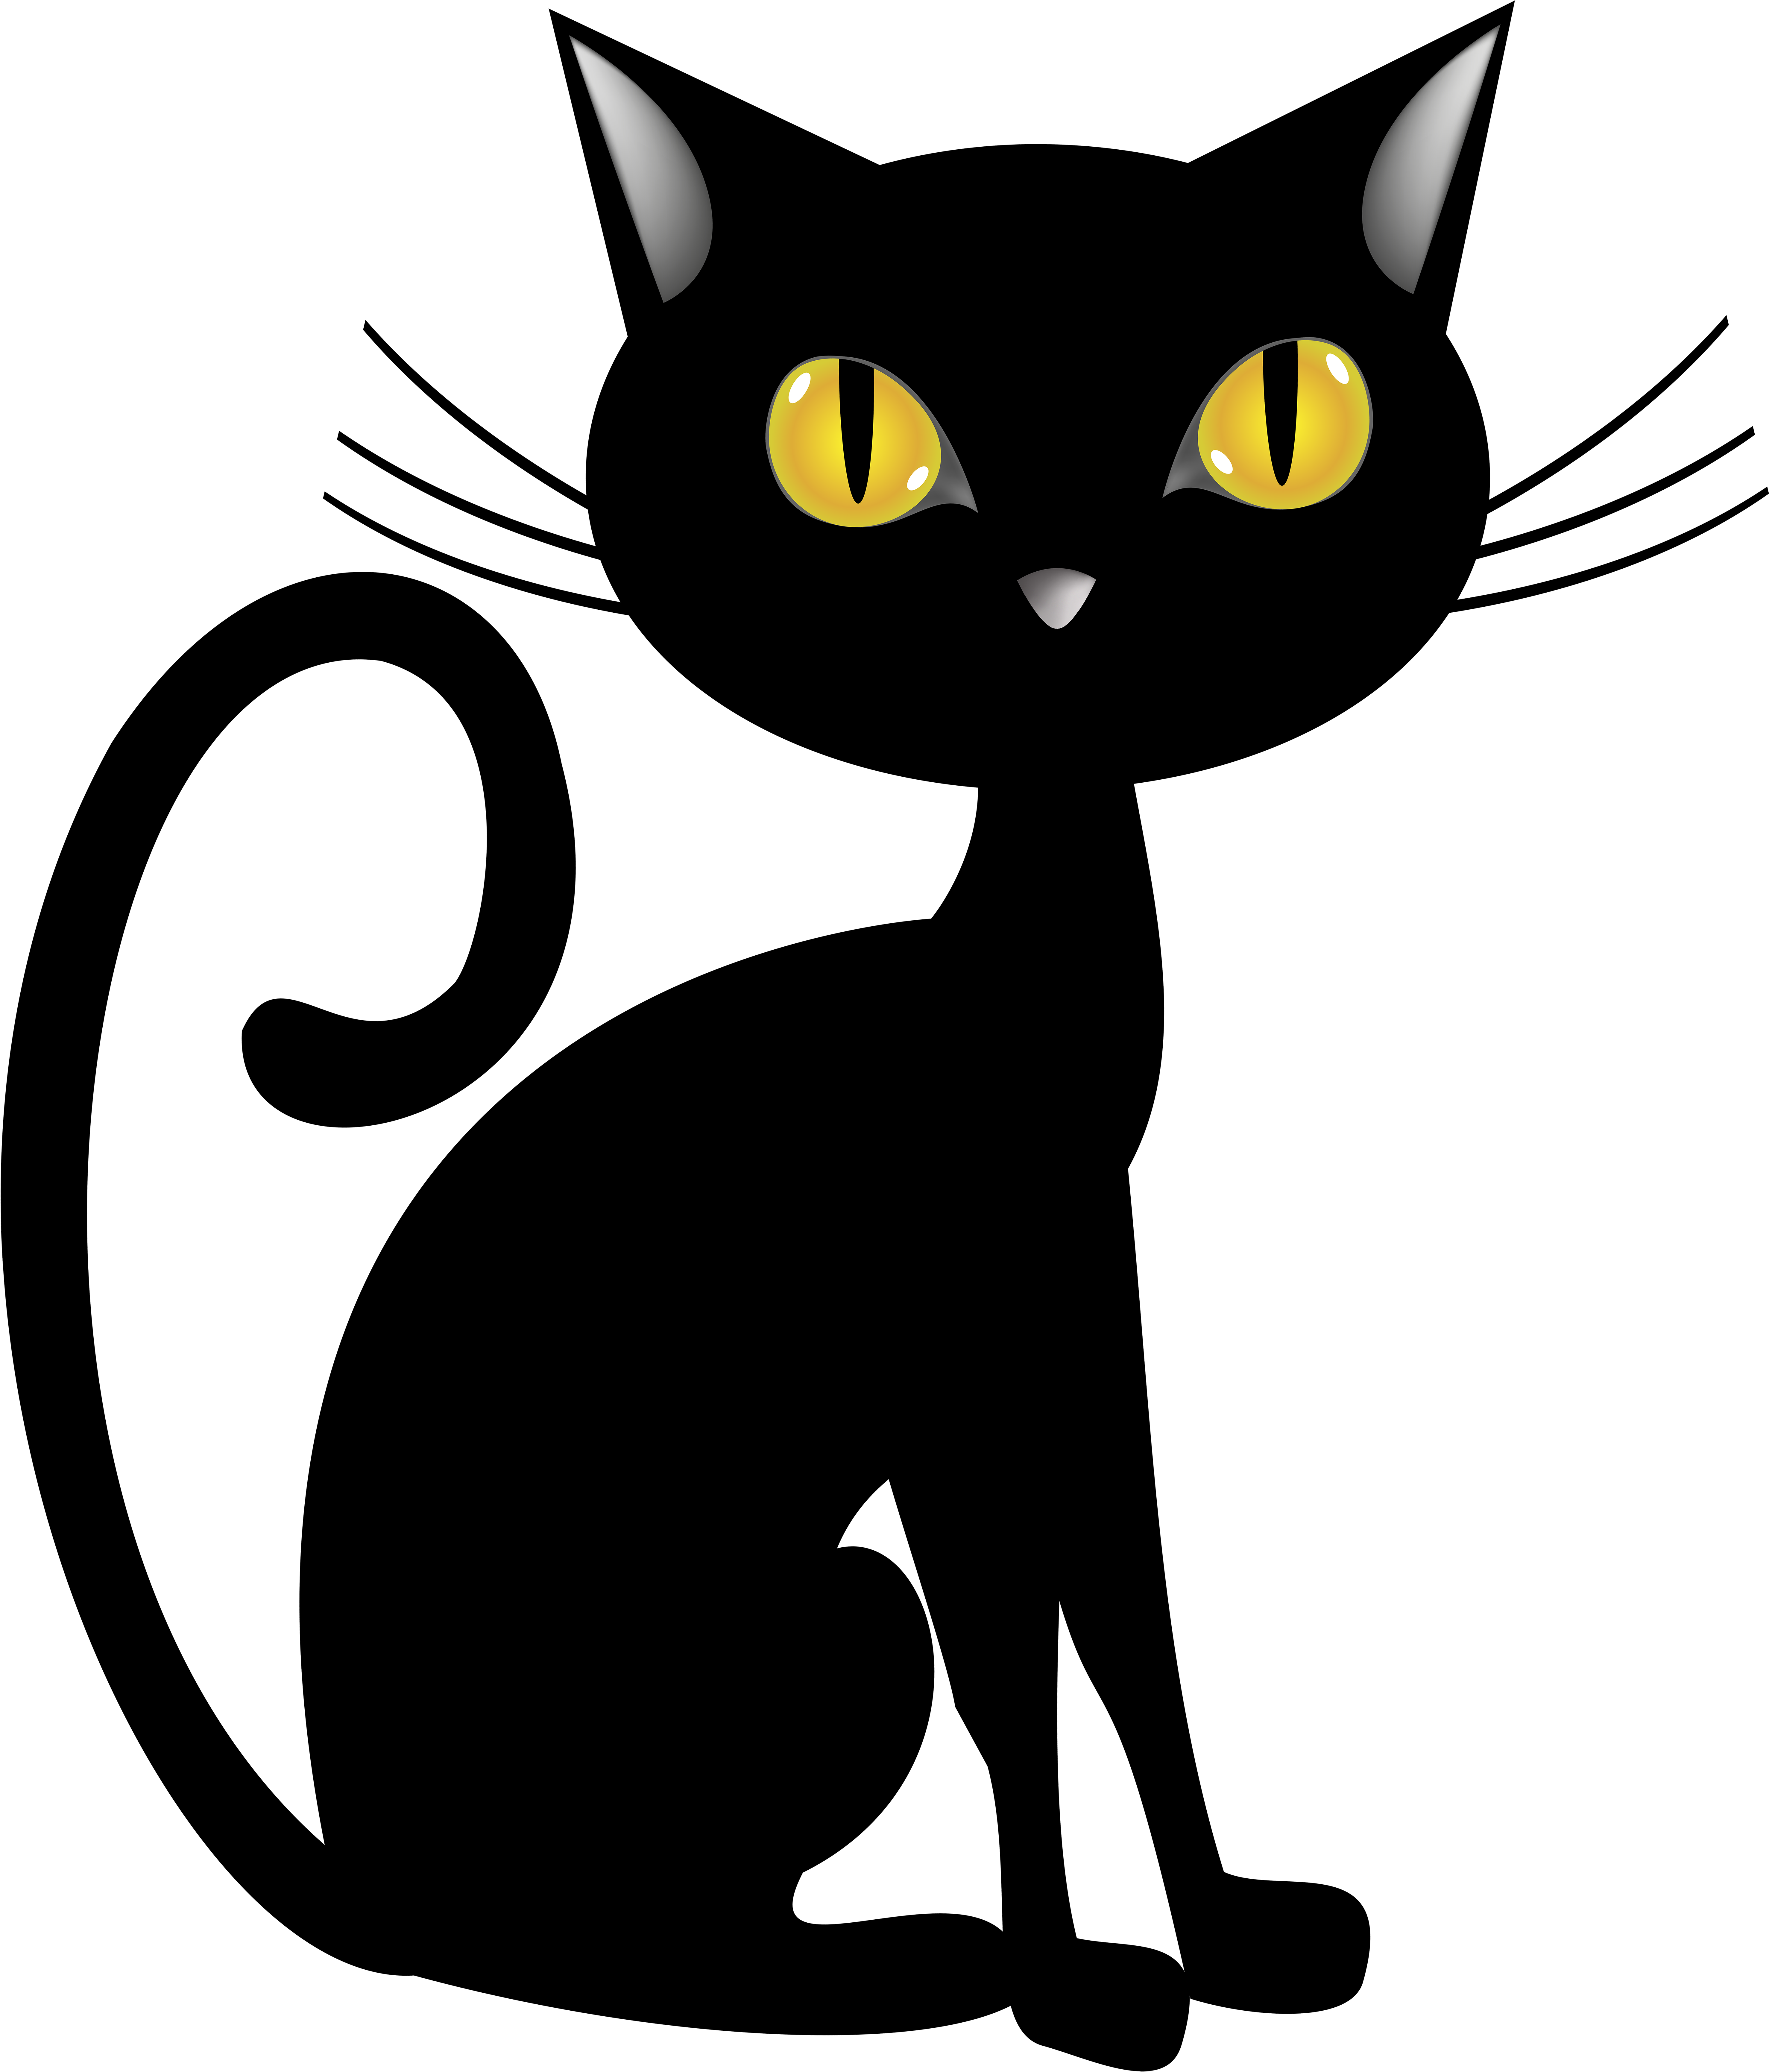 A Cat's Face With Yellow Eyes